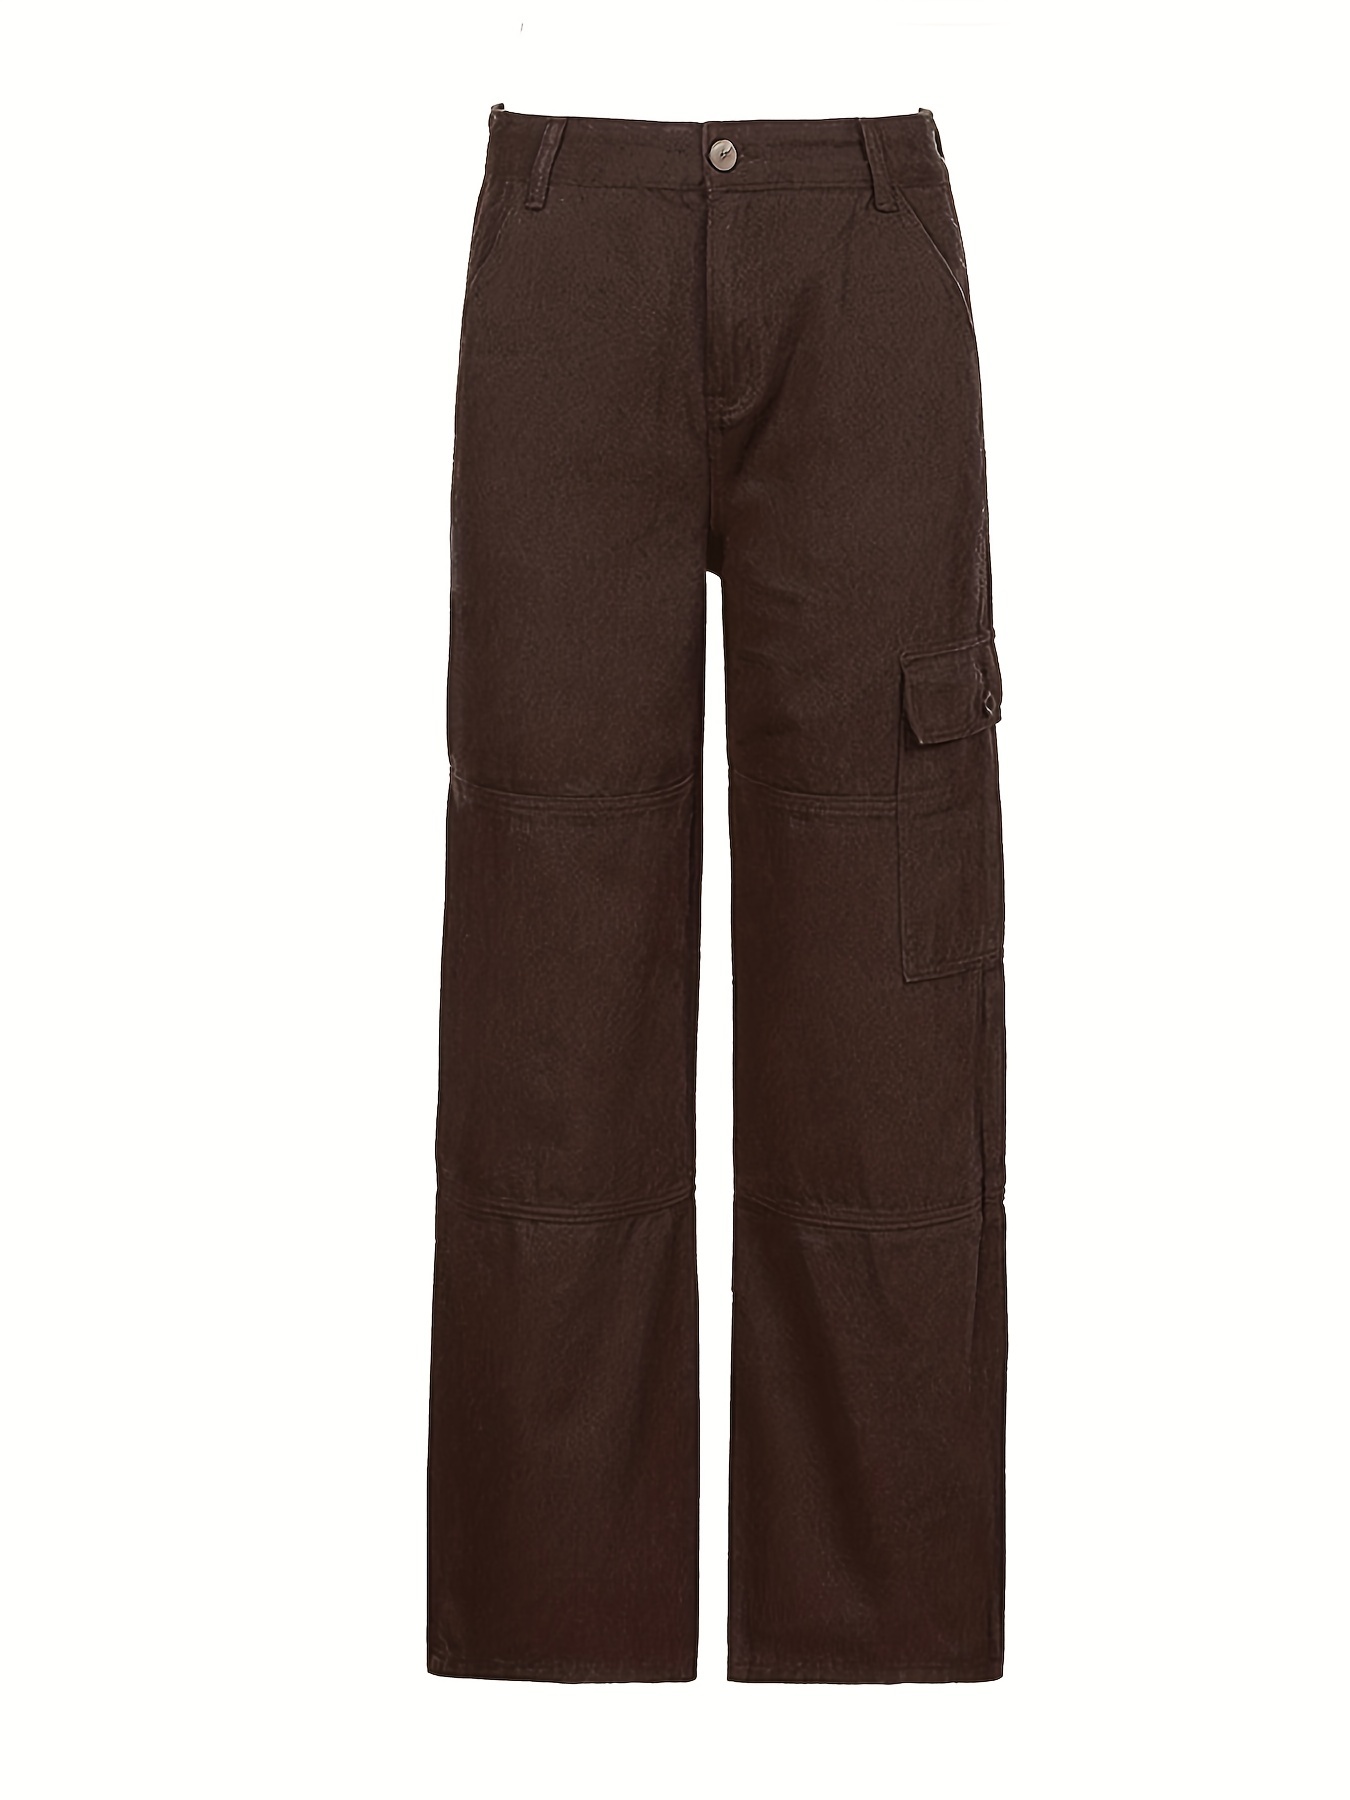 Topshop one side cut out bengaline flared pants in brown pinstripe | ASOS